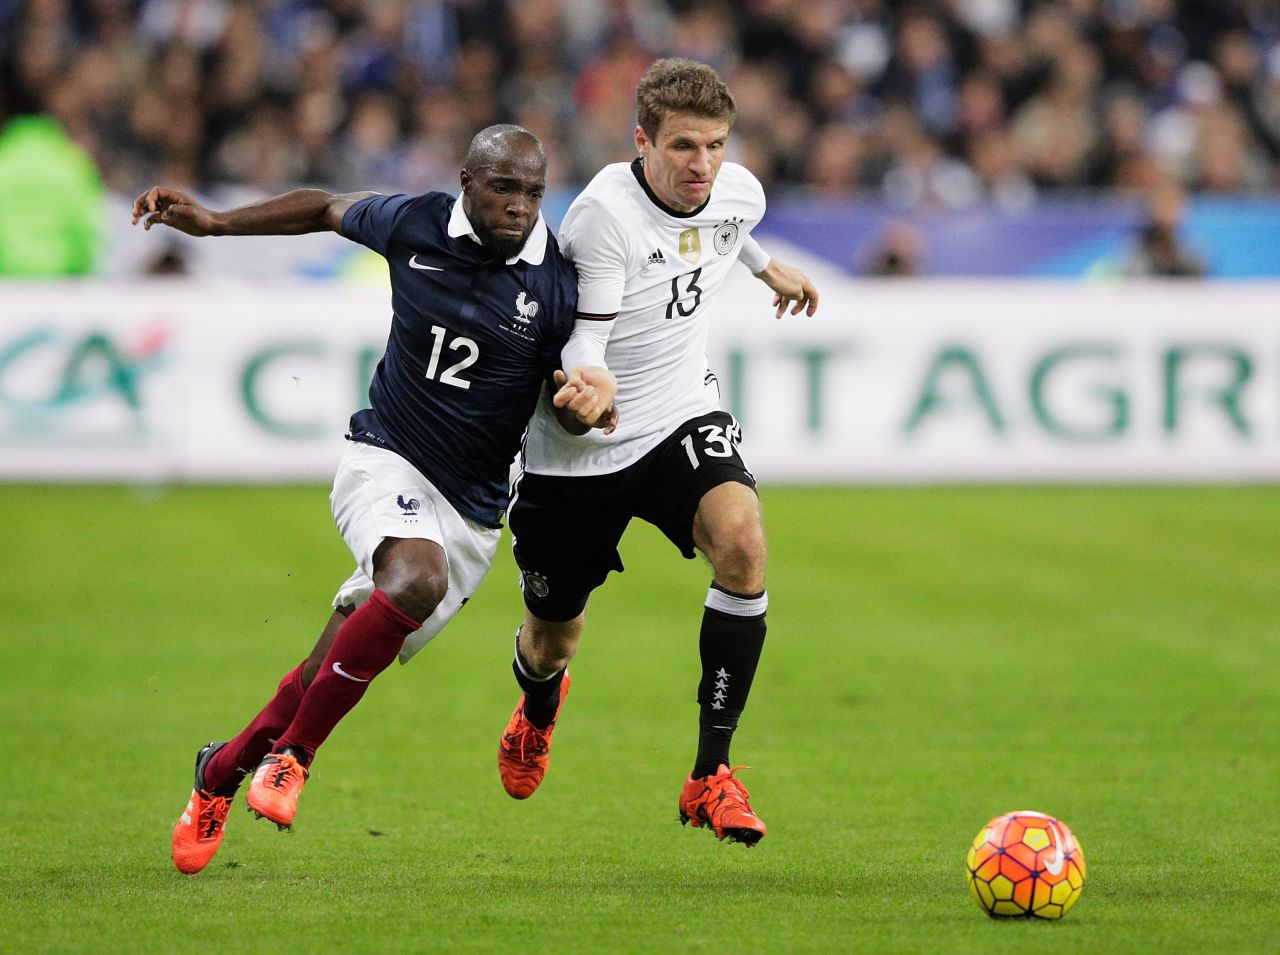 Lassana Diarra (No 12) tussles with Thomas Mueller of Germany during the match at the Stade de France. Diarra later revealed that his cousin had been a victim of the attacks in Paris. 